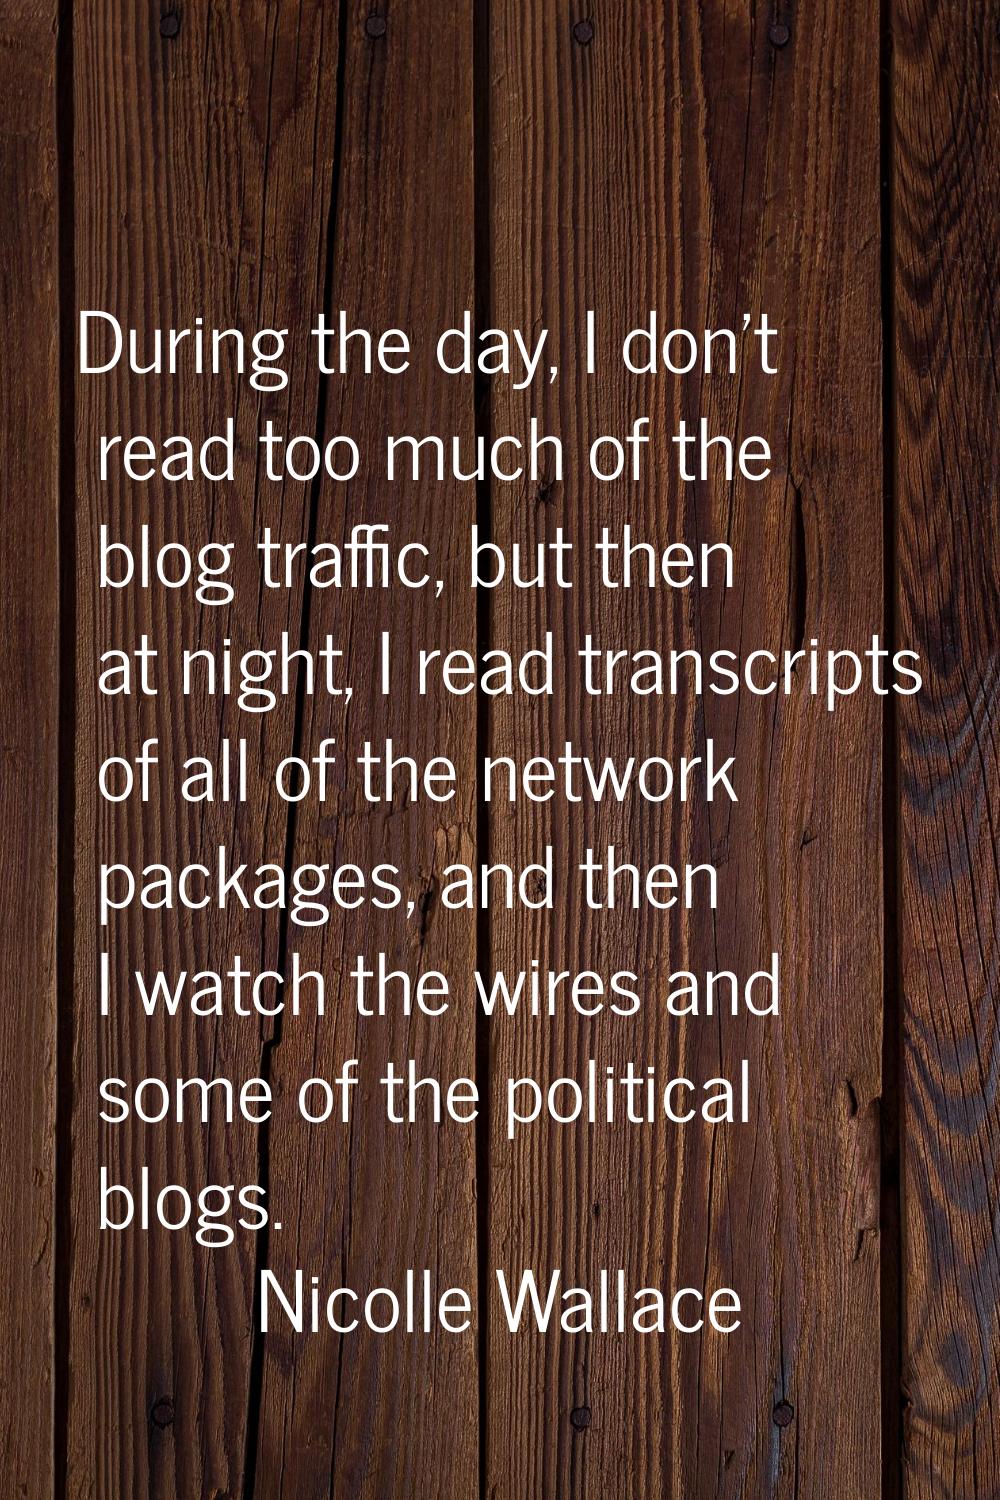 During the day, I don't read too much of the blog traffic, but then at night, I read transcripts of